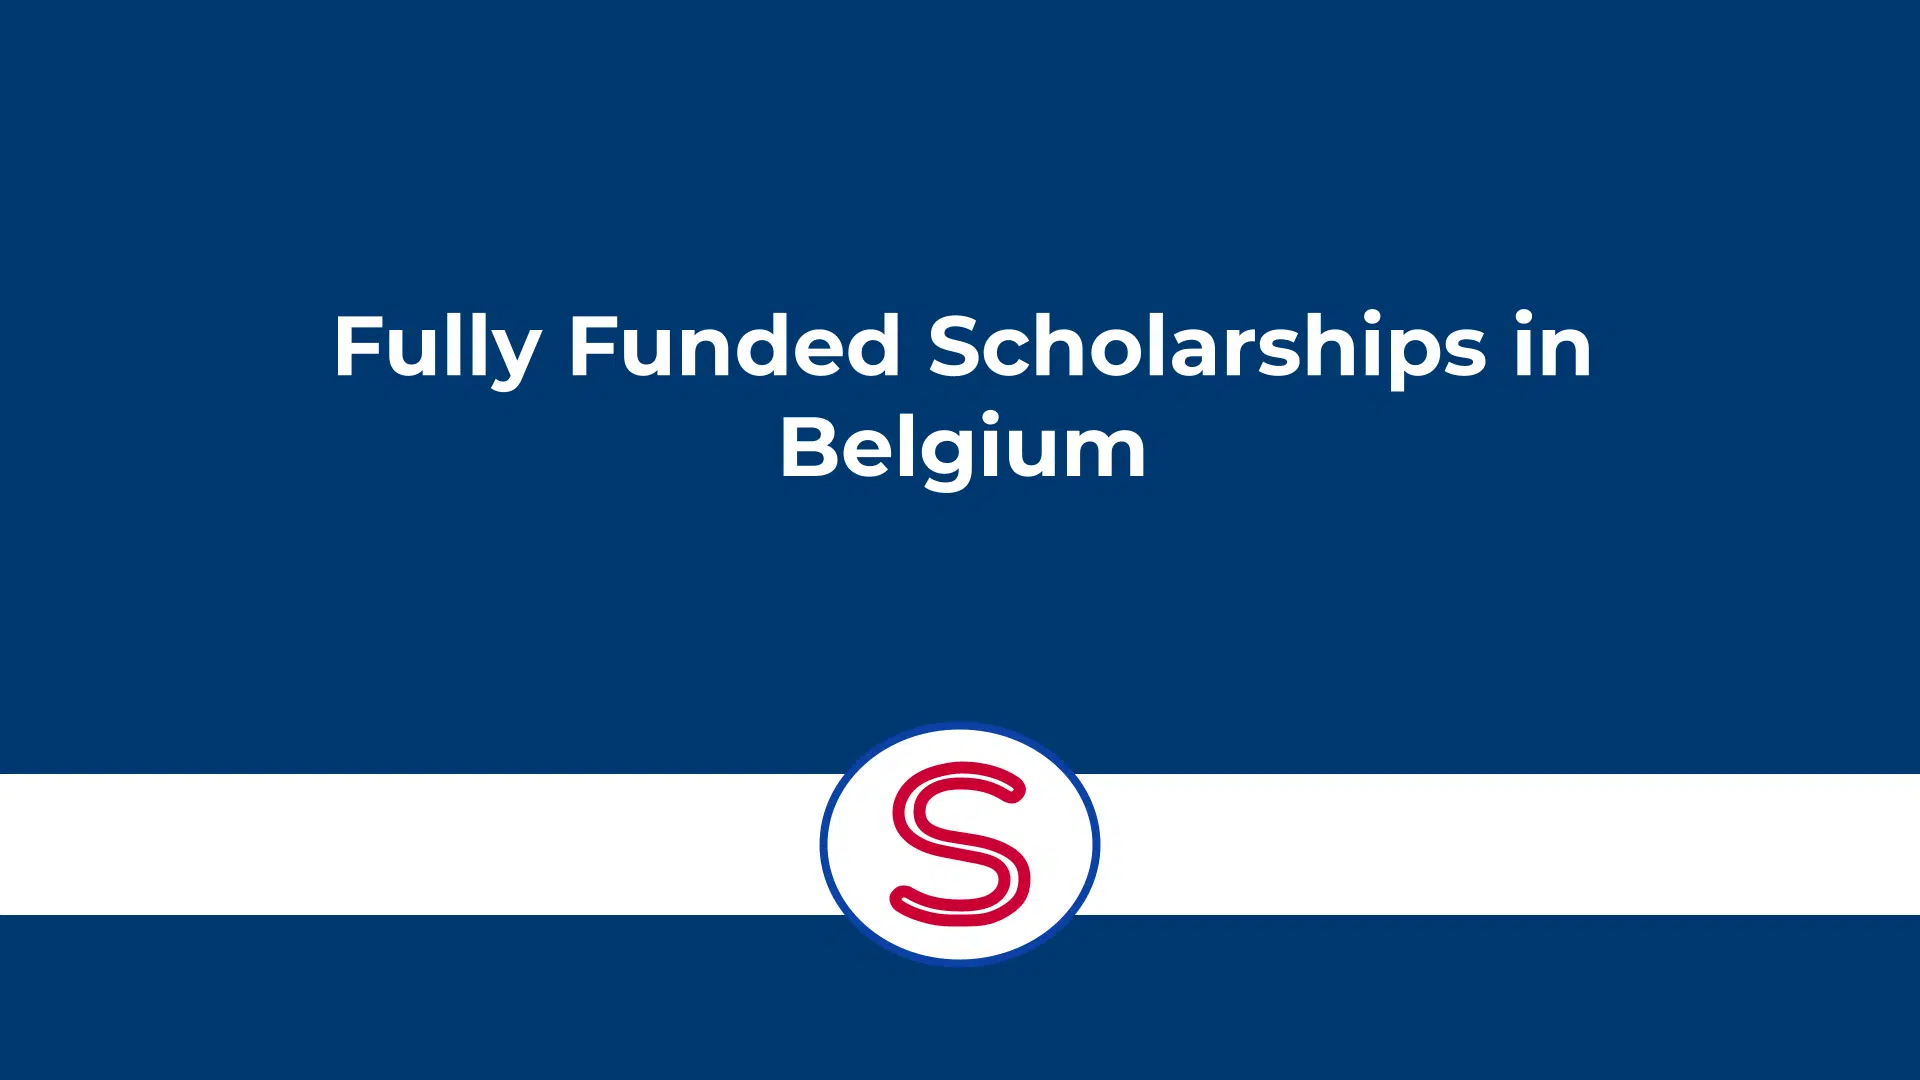 Fully Funded Scholarships in Belgium